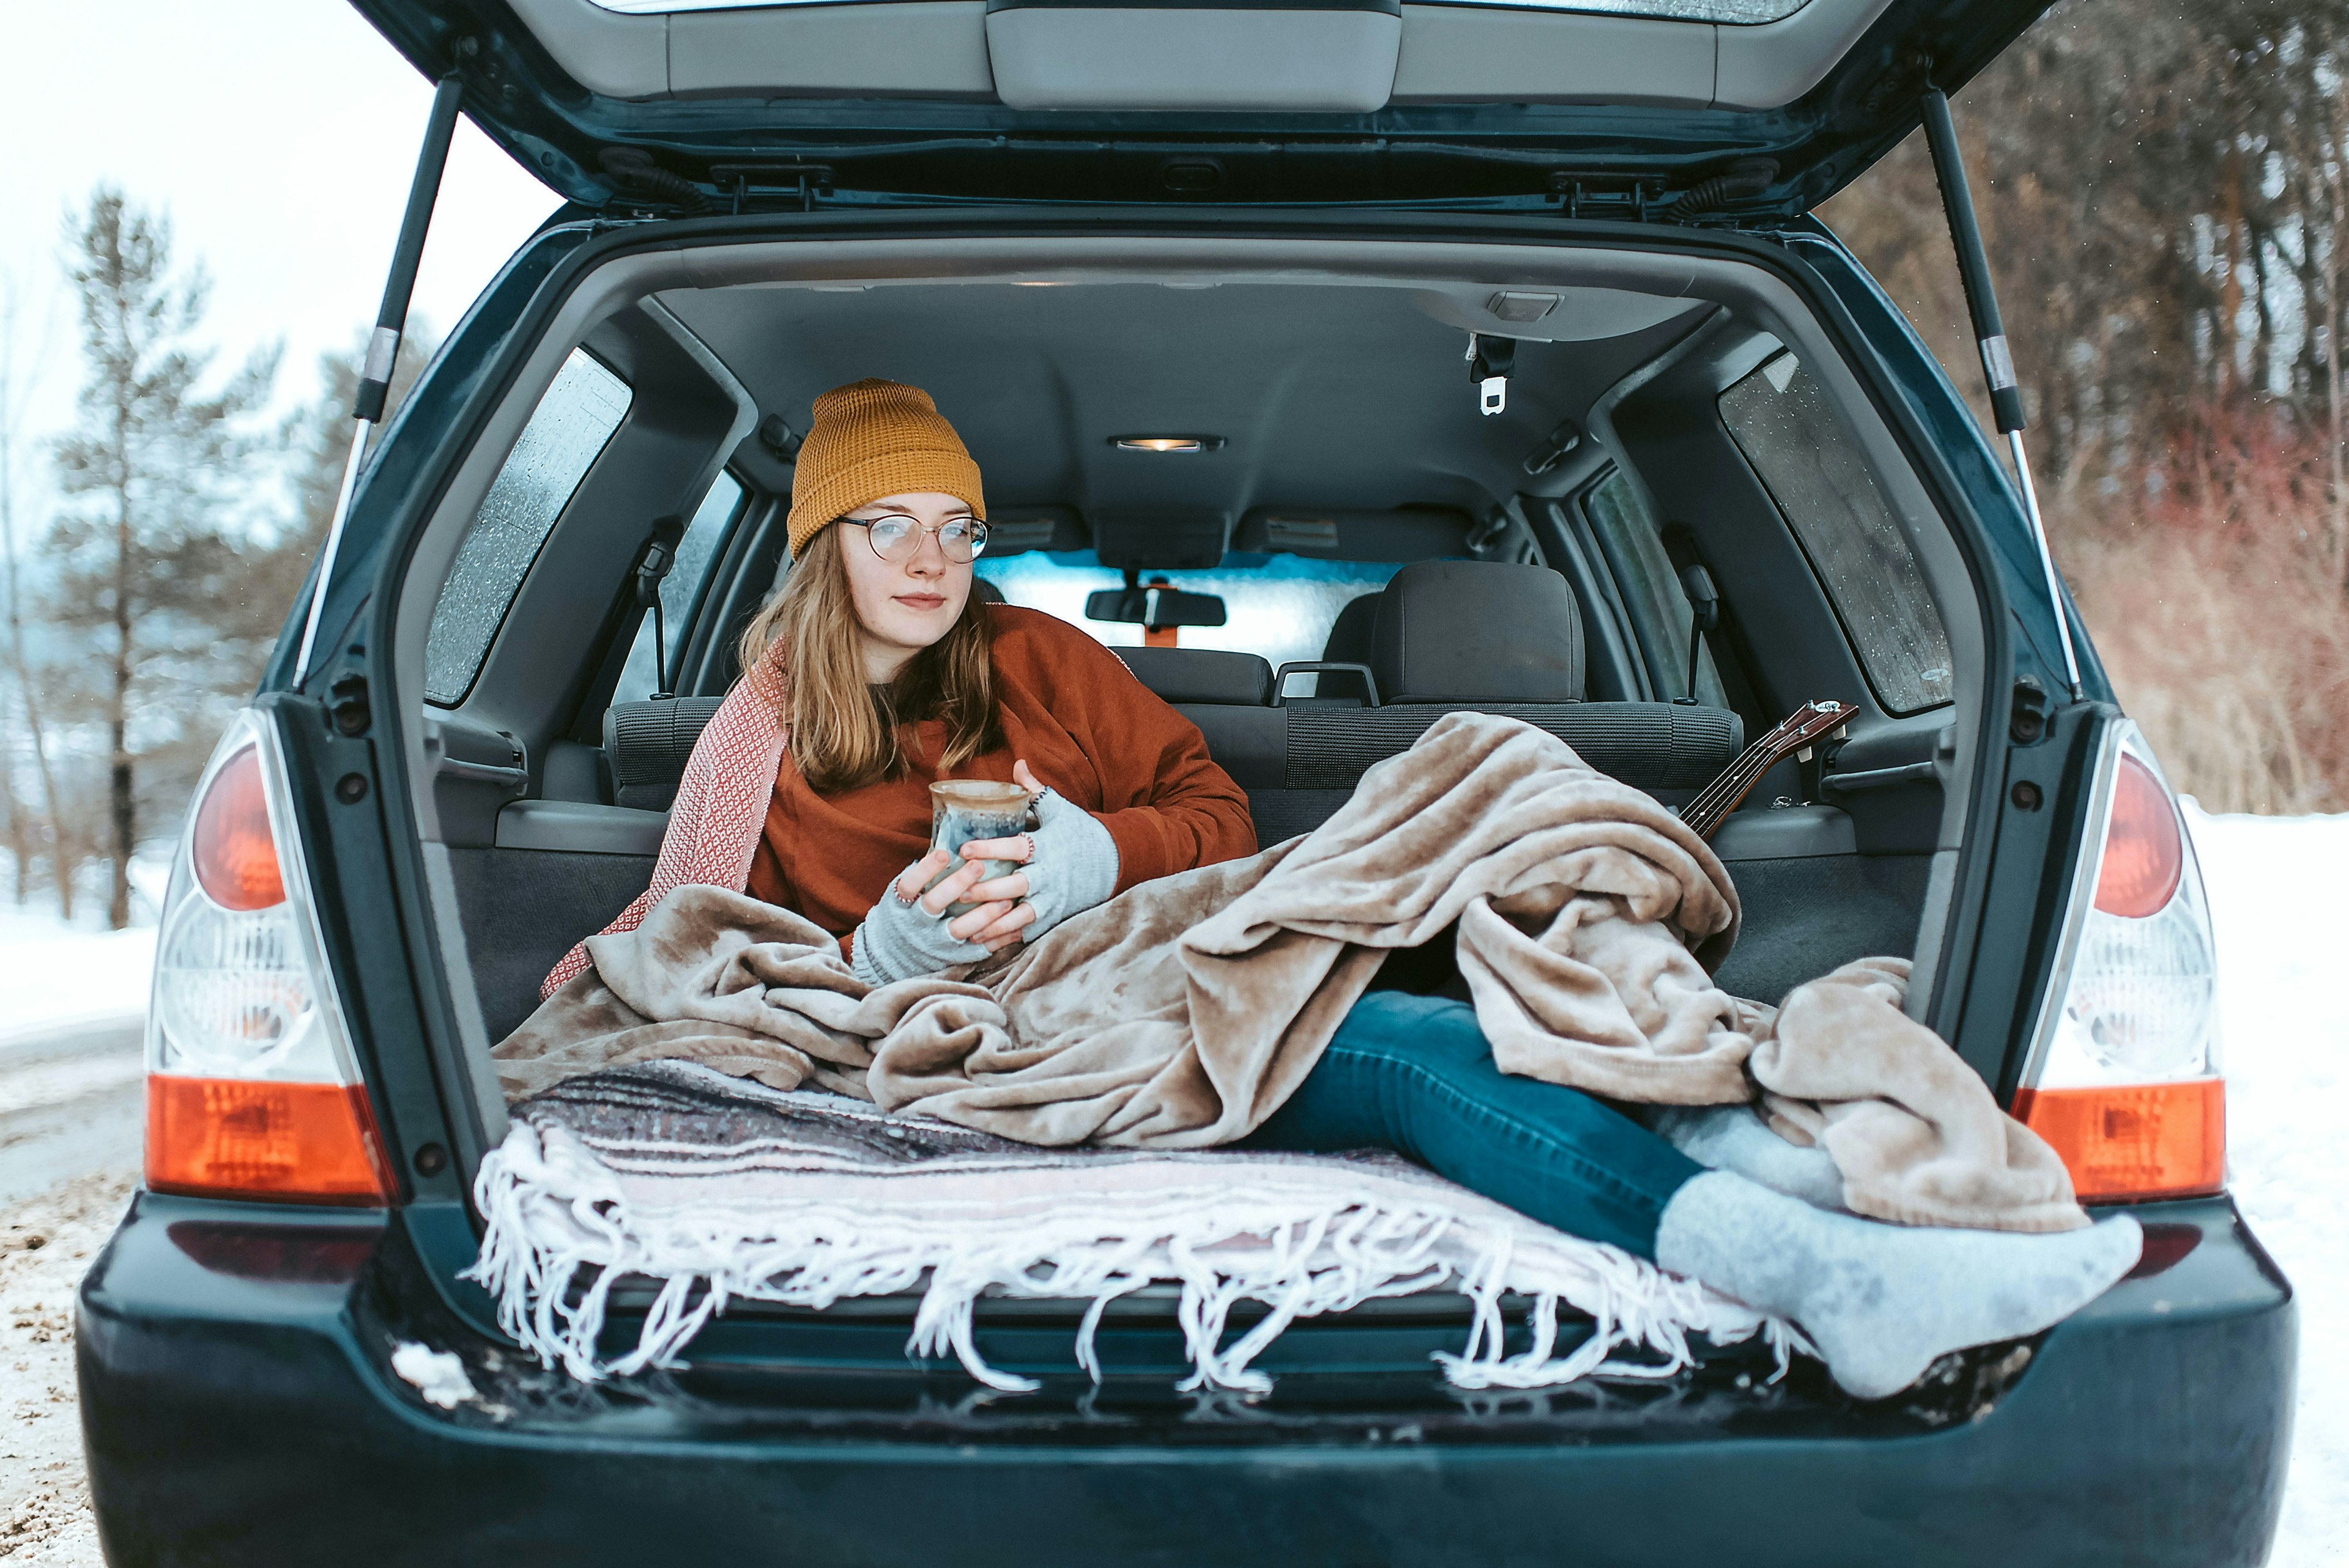 A woman sitting the trunk of a car drinking coffee, under a blanket